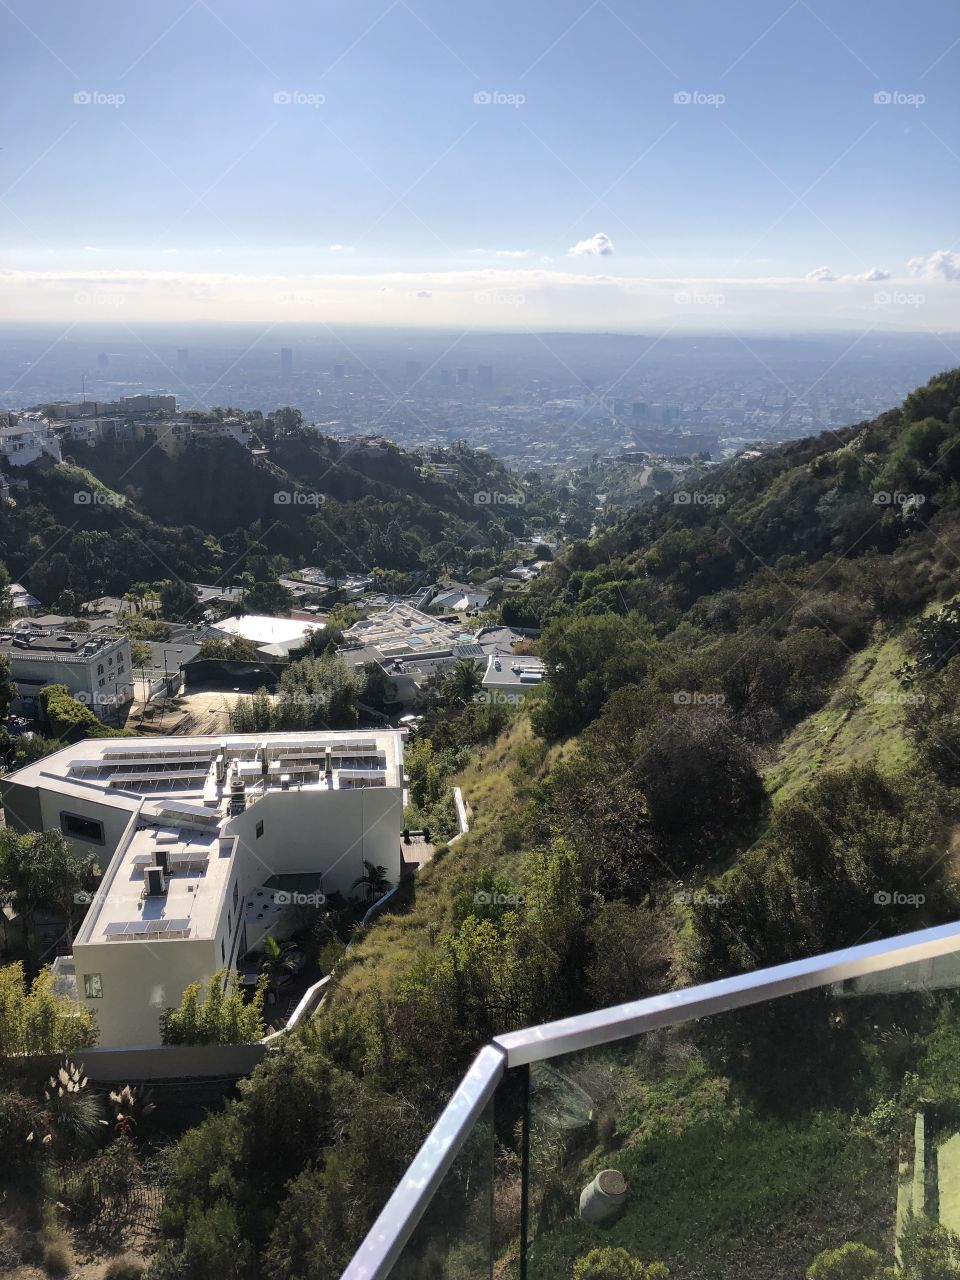 Hollywood hills view from million dollar mansion, this is a view of the American dream in Los Angeles. 